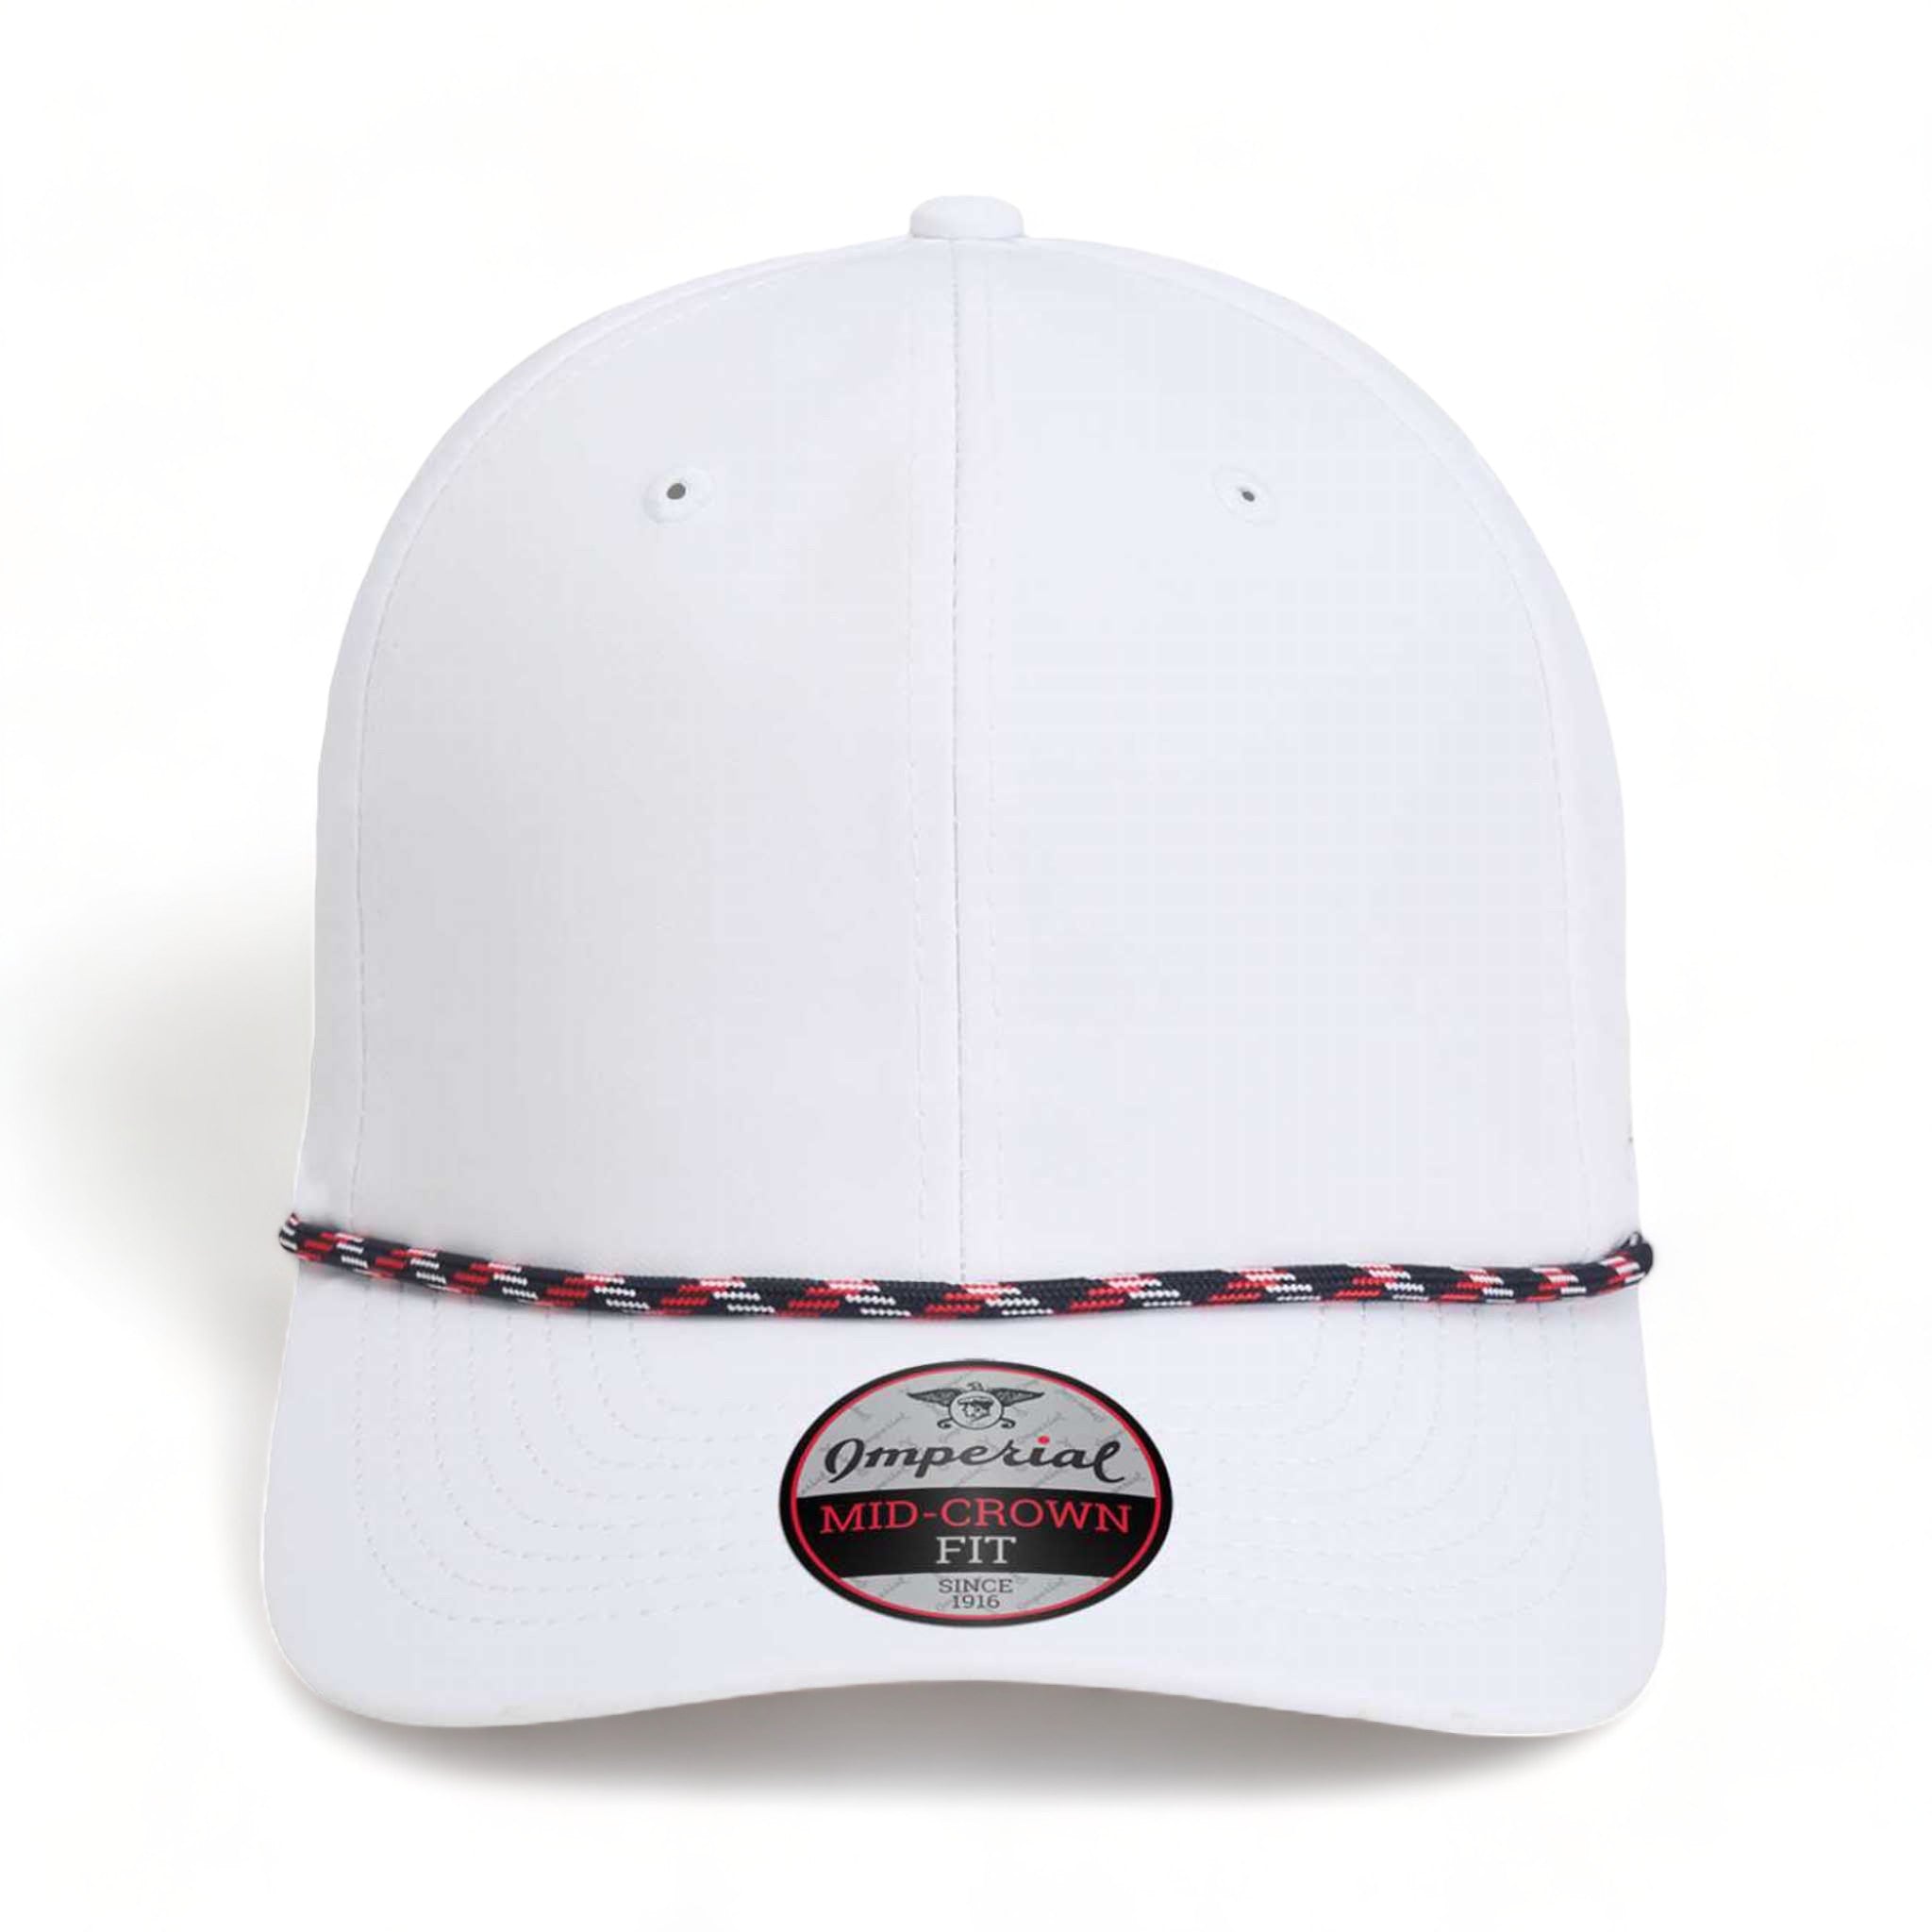 Front view of Imperial 7054 custom hat in white, navy, white and red